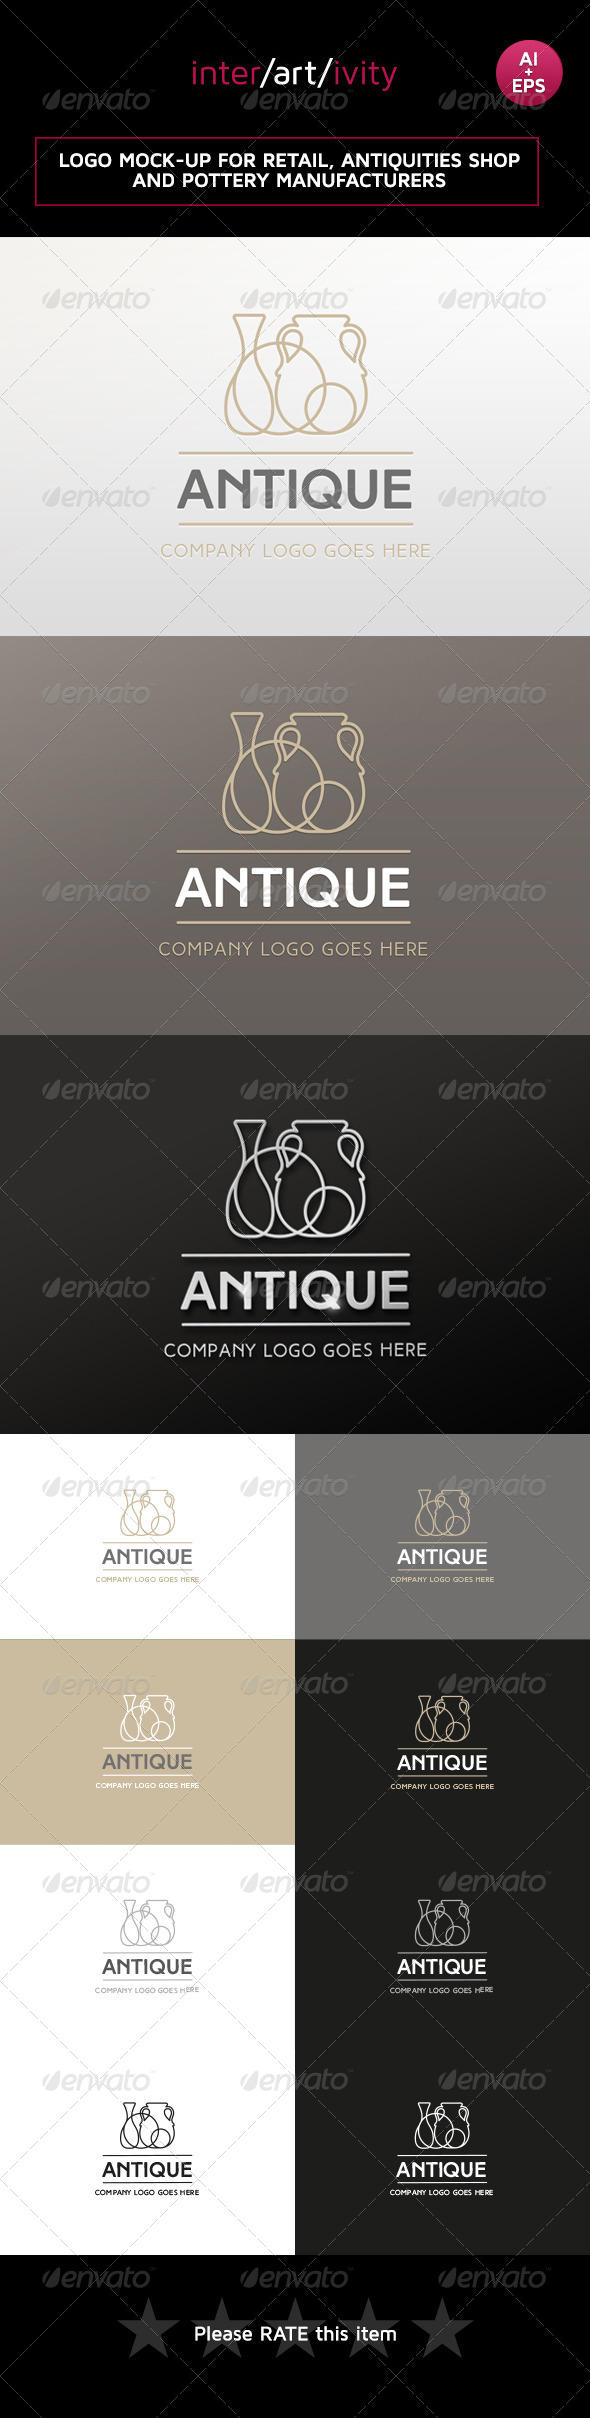 Logo design for antiques and retail